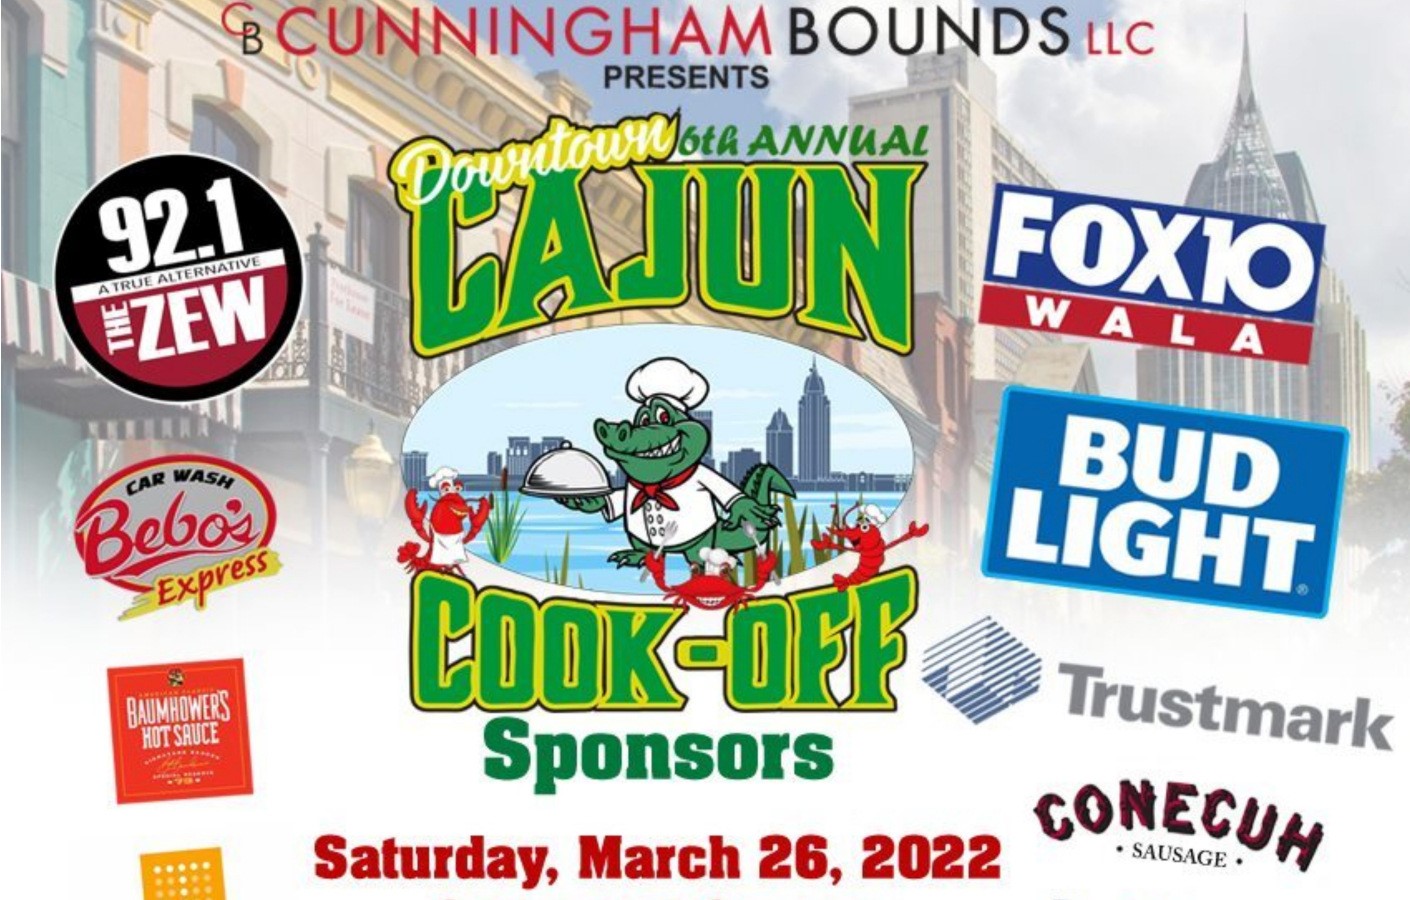 SIXTH ANNUAL DOWNTOWN CAJUN COOKOFF